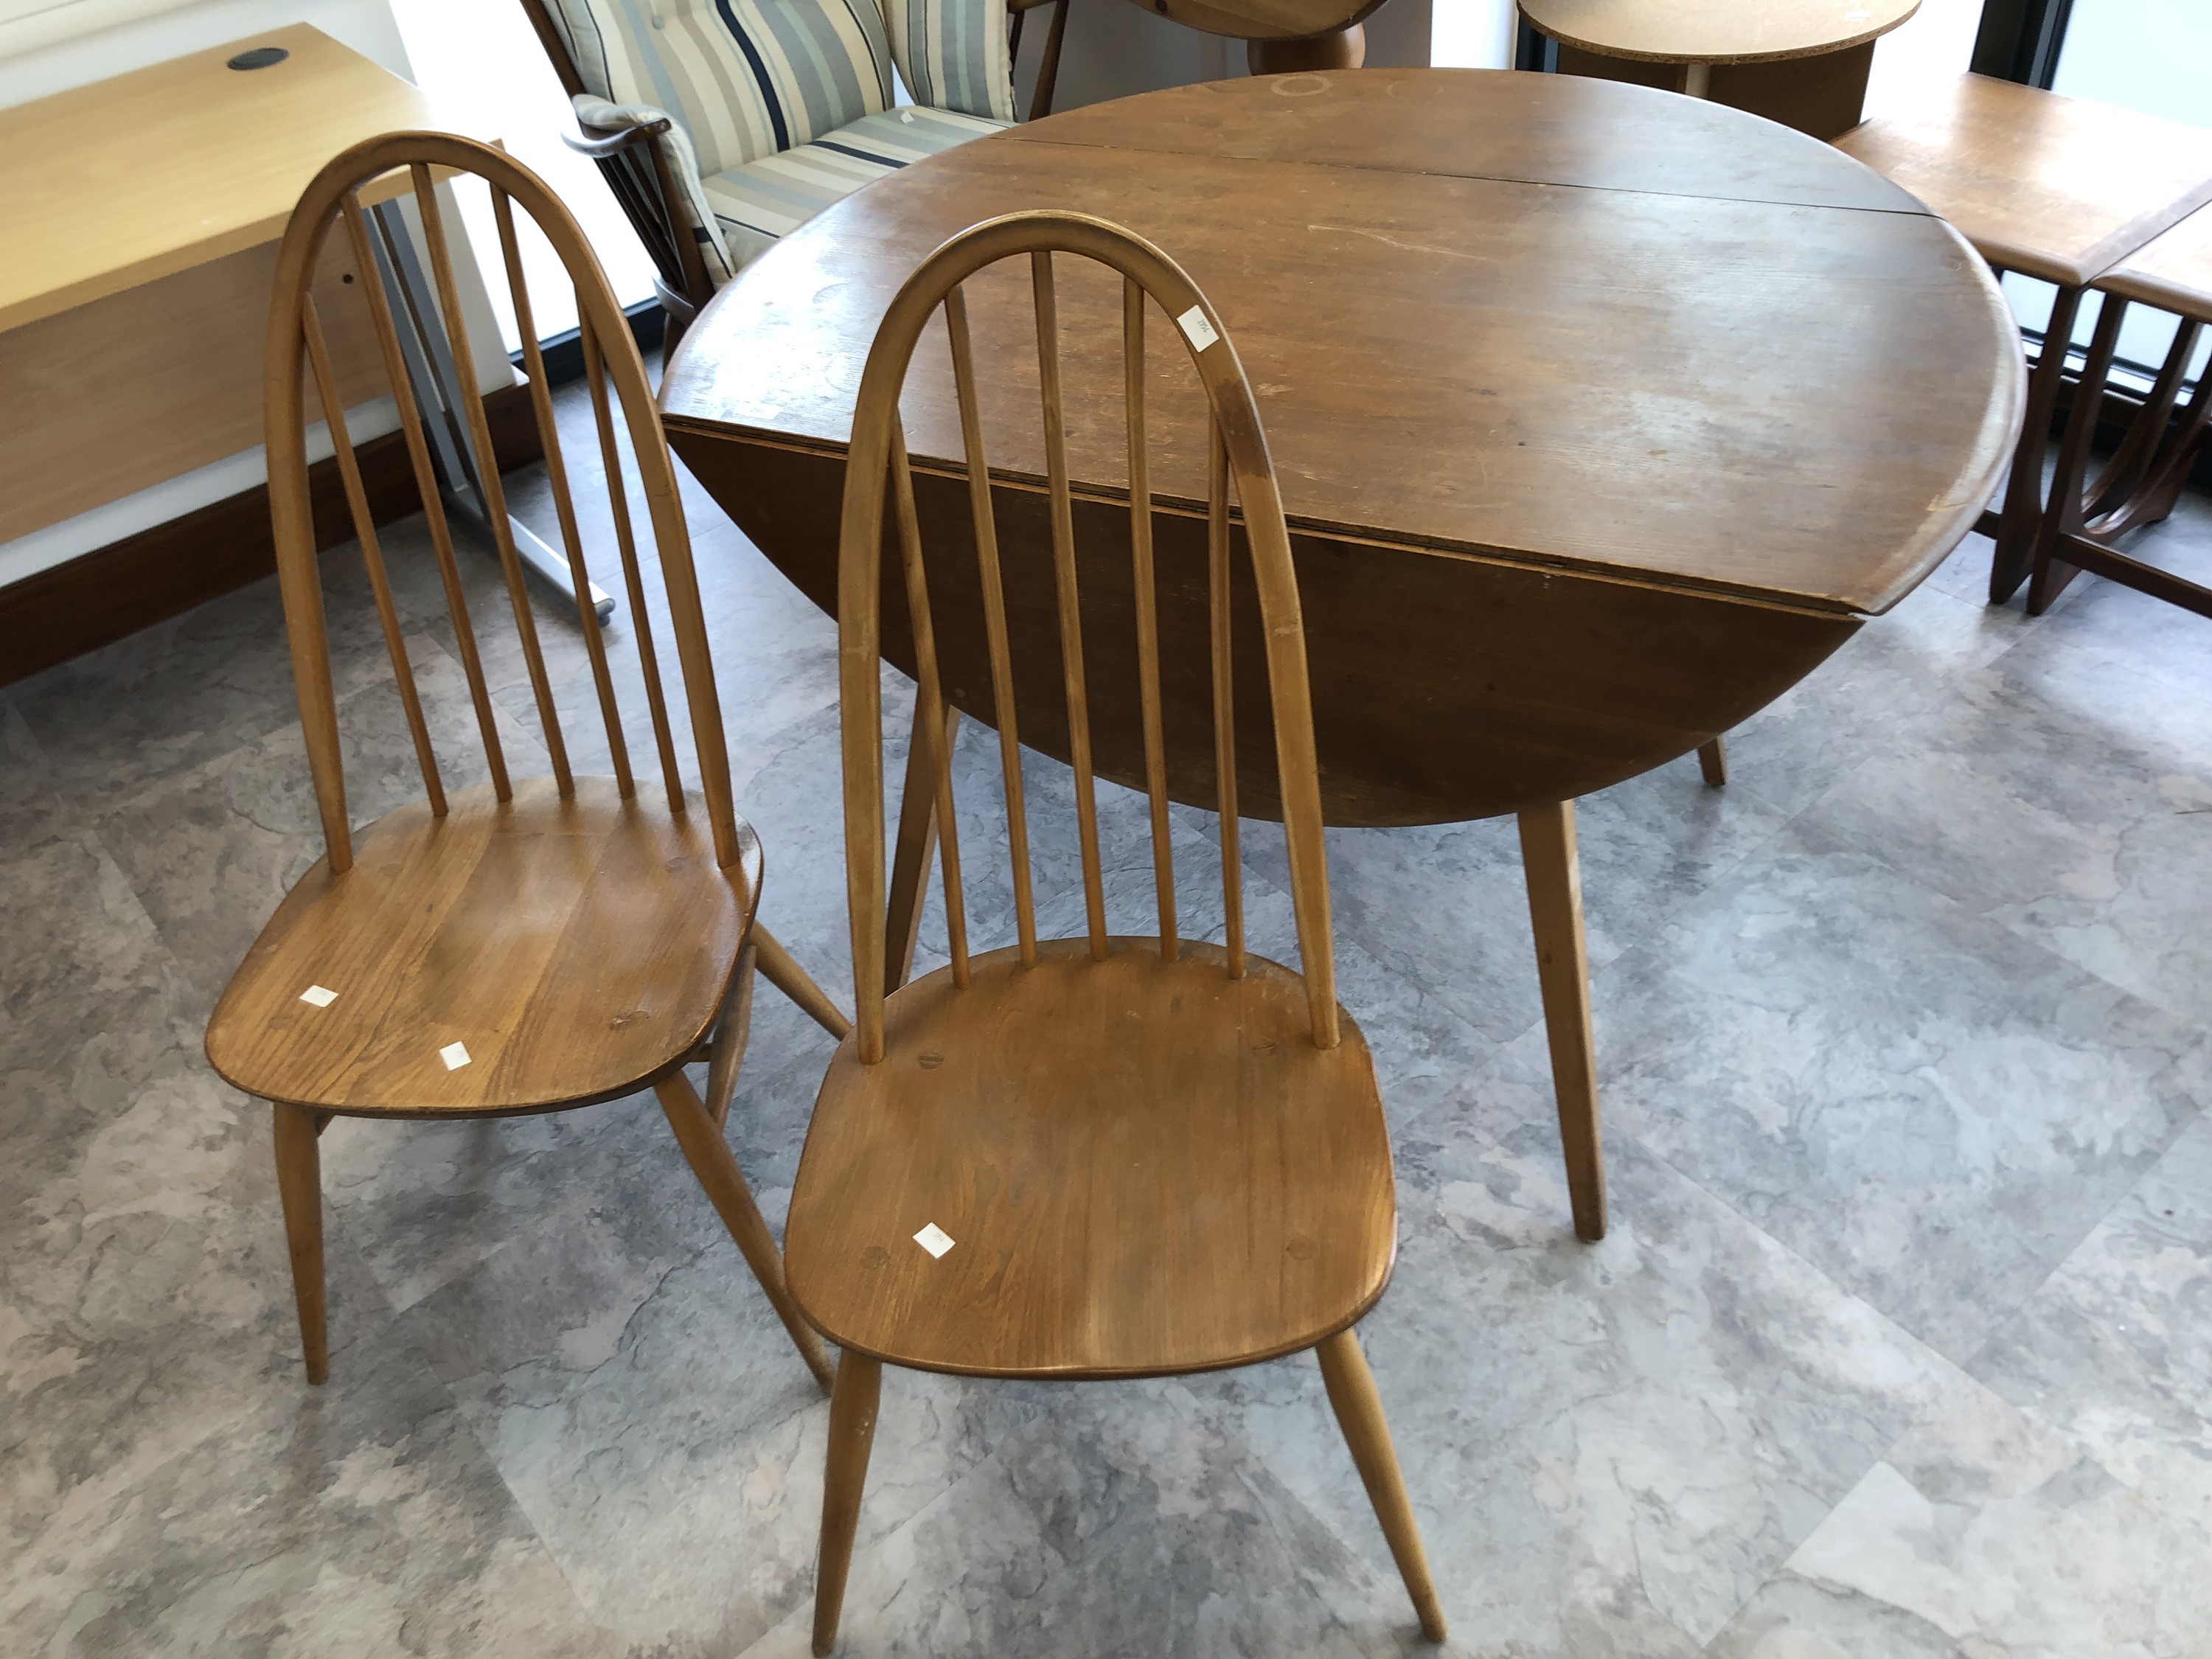 Ercol drop leaf table, height 71cm width 114cm depth 63cm, and a matching pair of Ercol chairs.